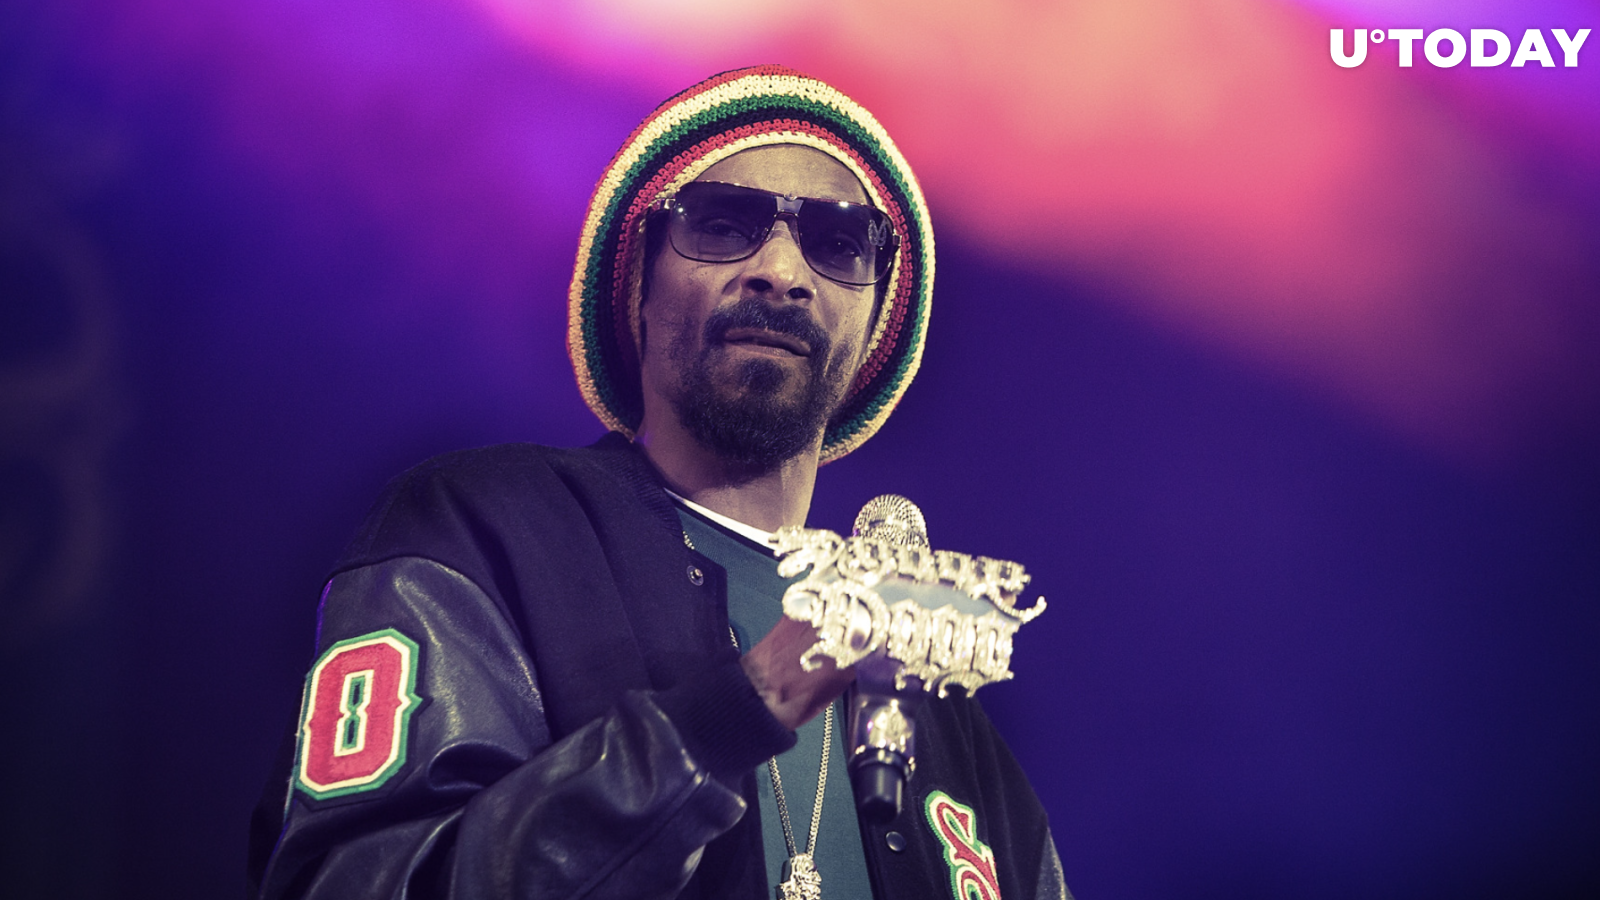 Snoop Dogg Shows Off Customized Golden Ledger Wallet on Twitter